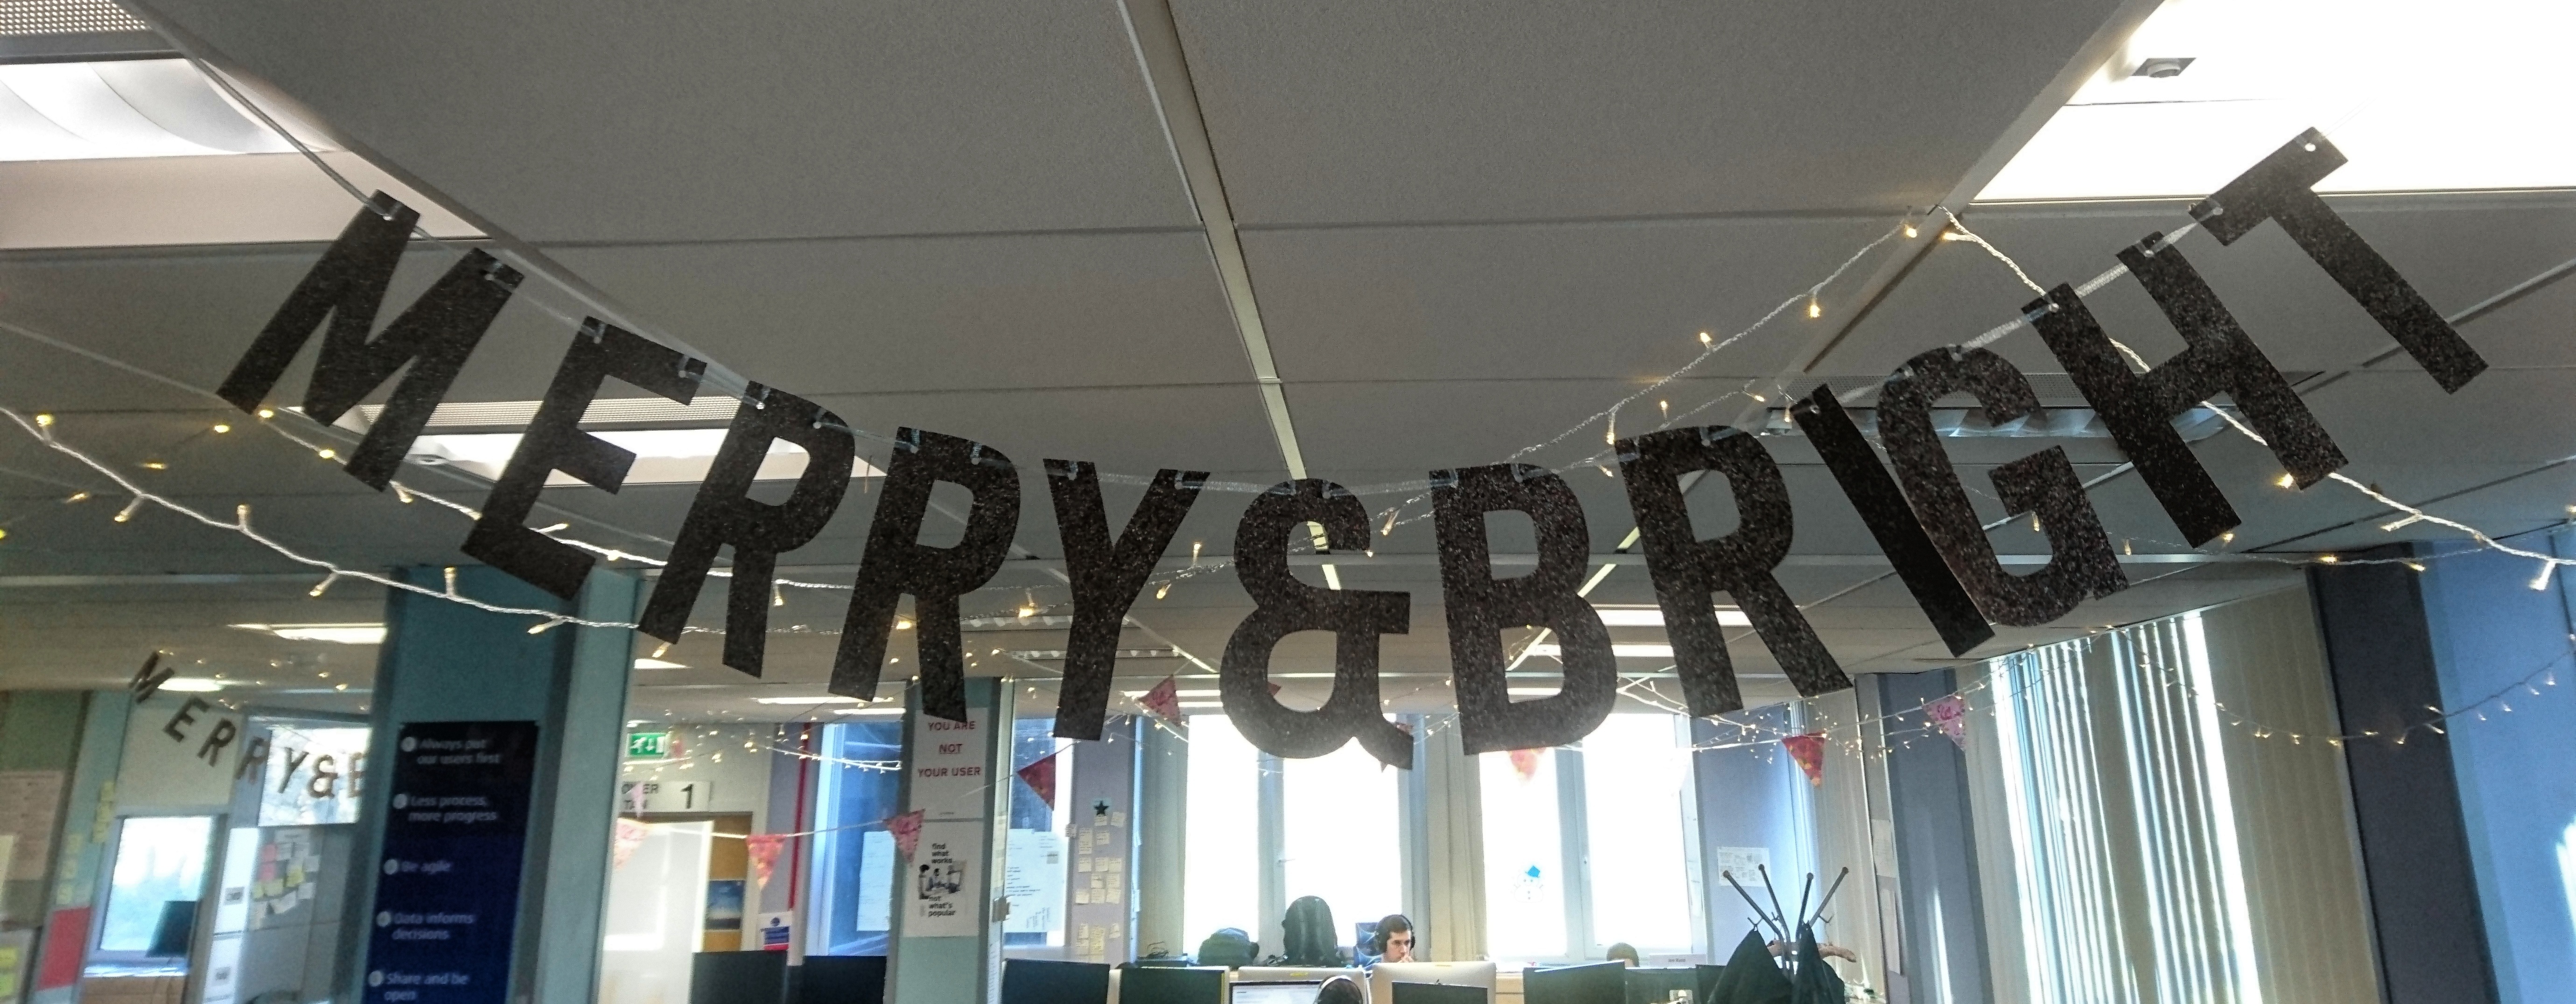 the words merry & bright hanging from the office ceiling